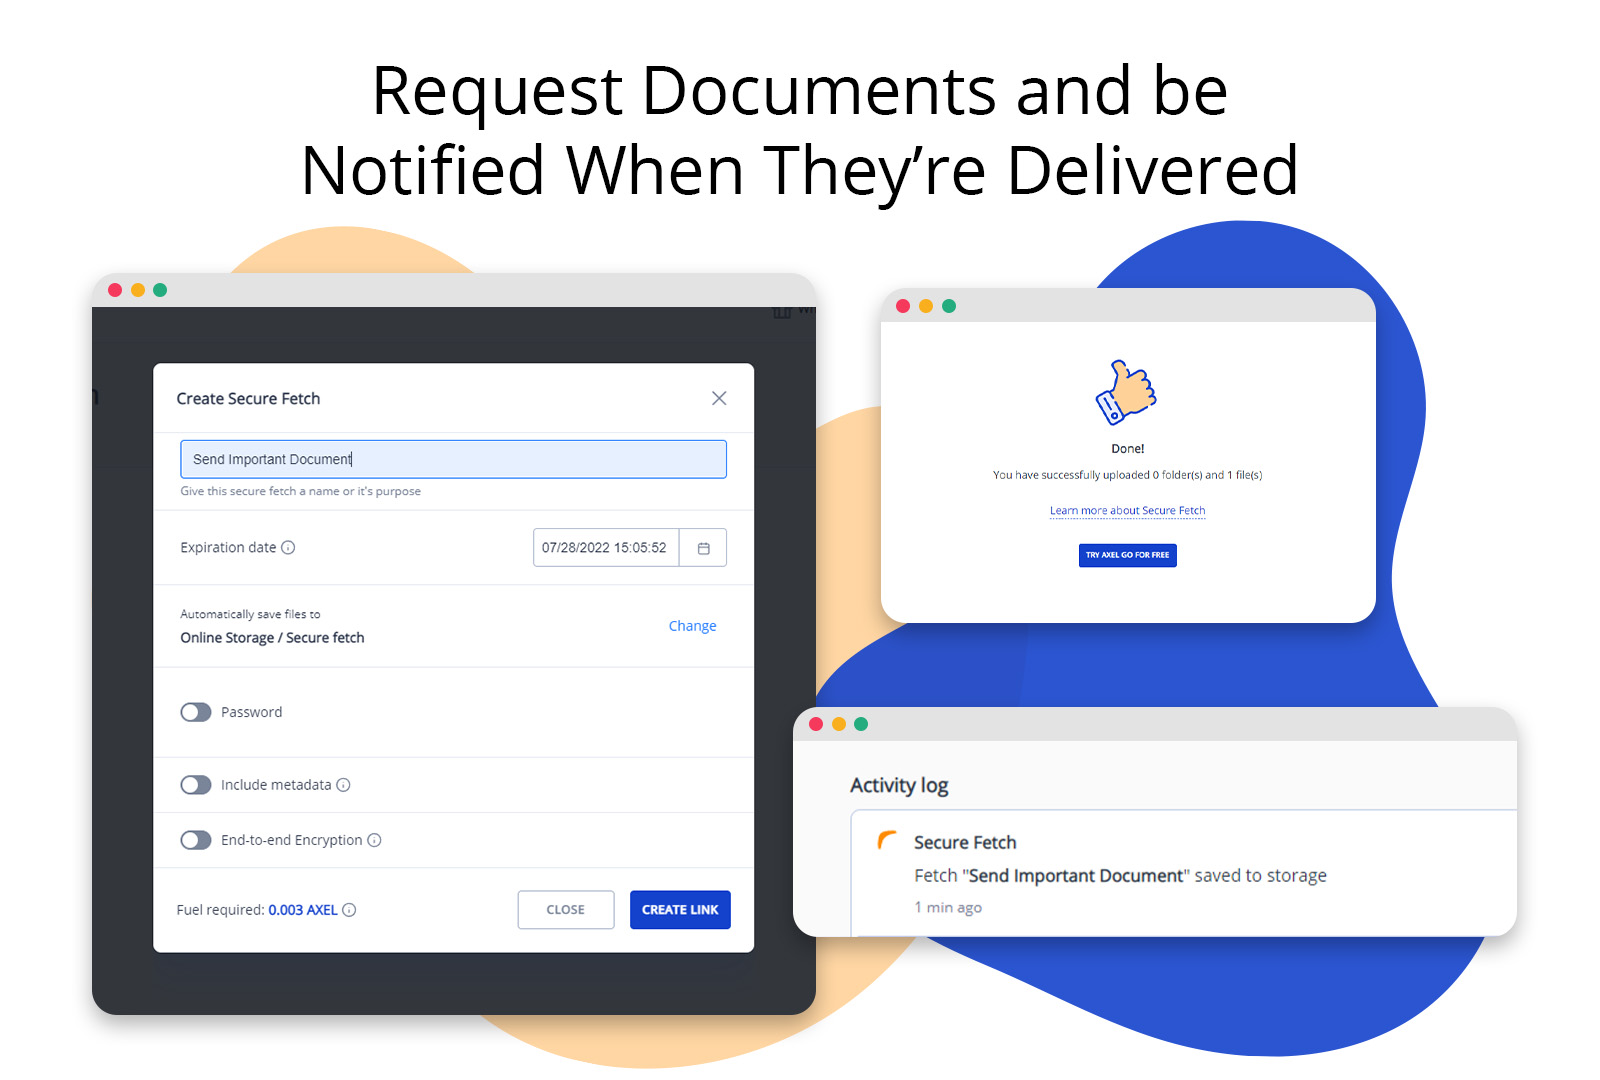 Request Documents and be Notified When They're Delivered